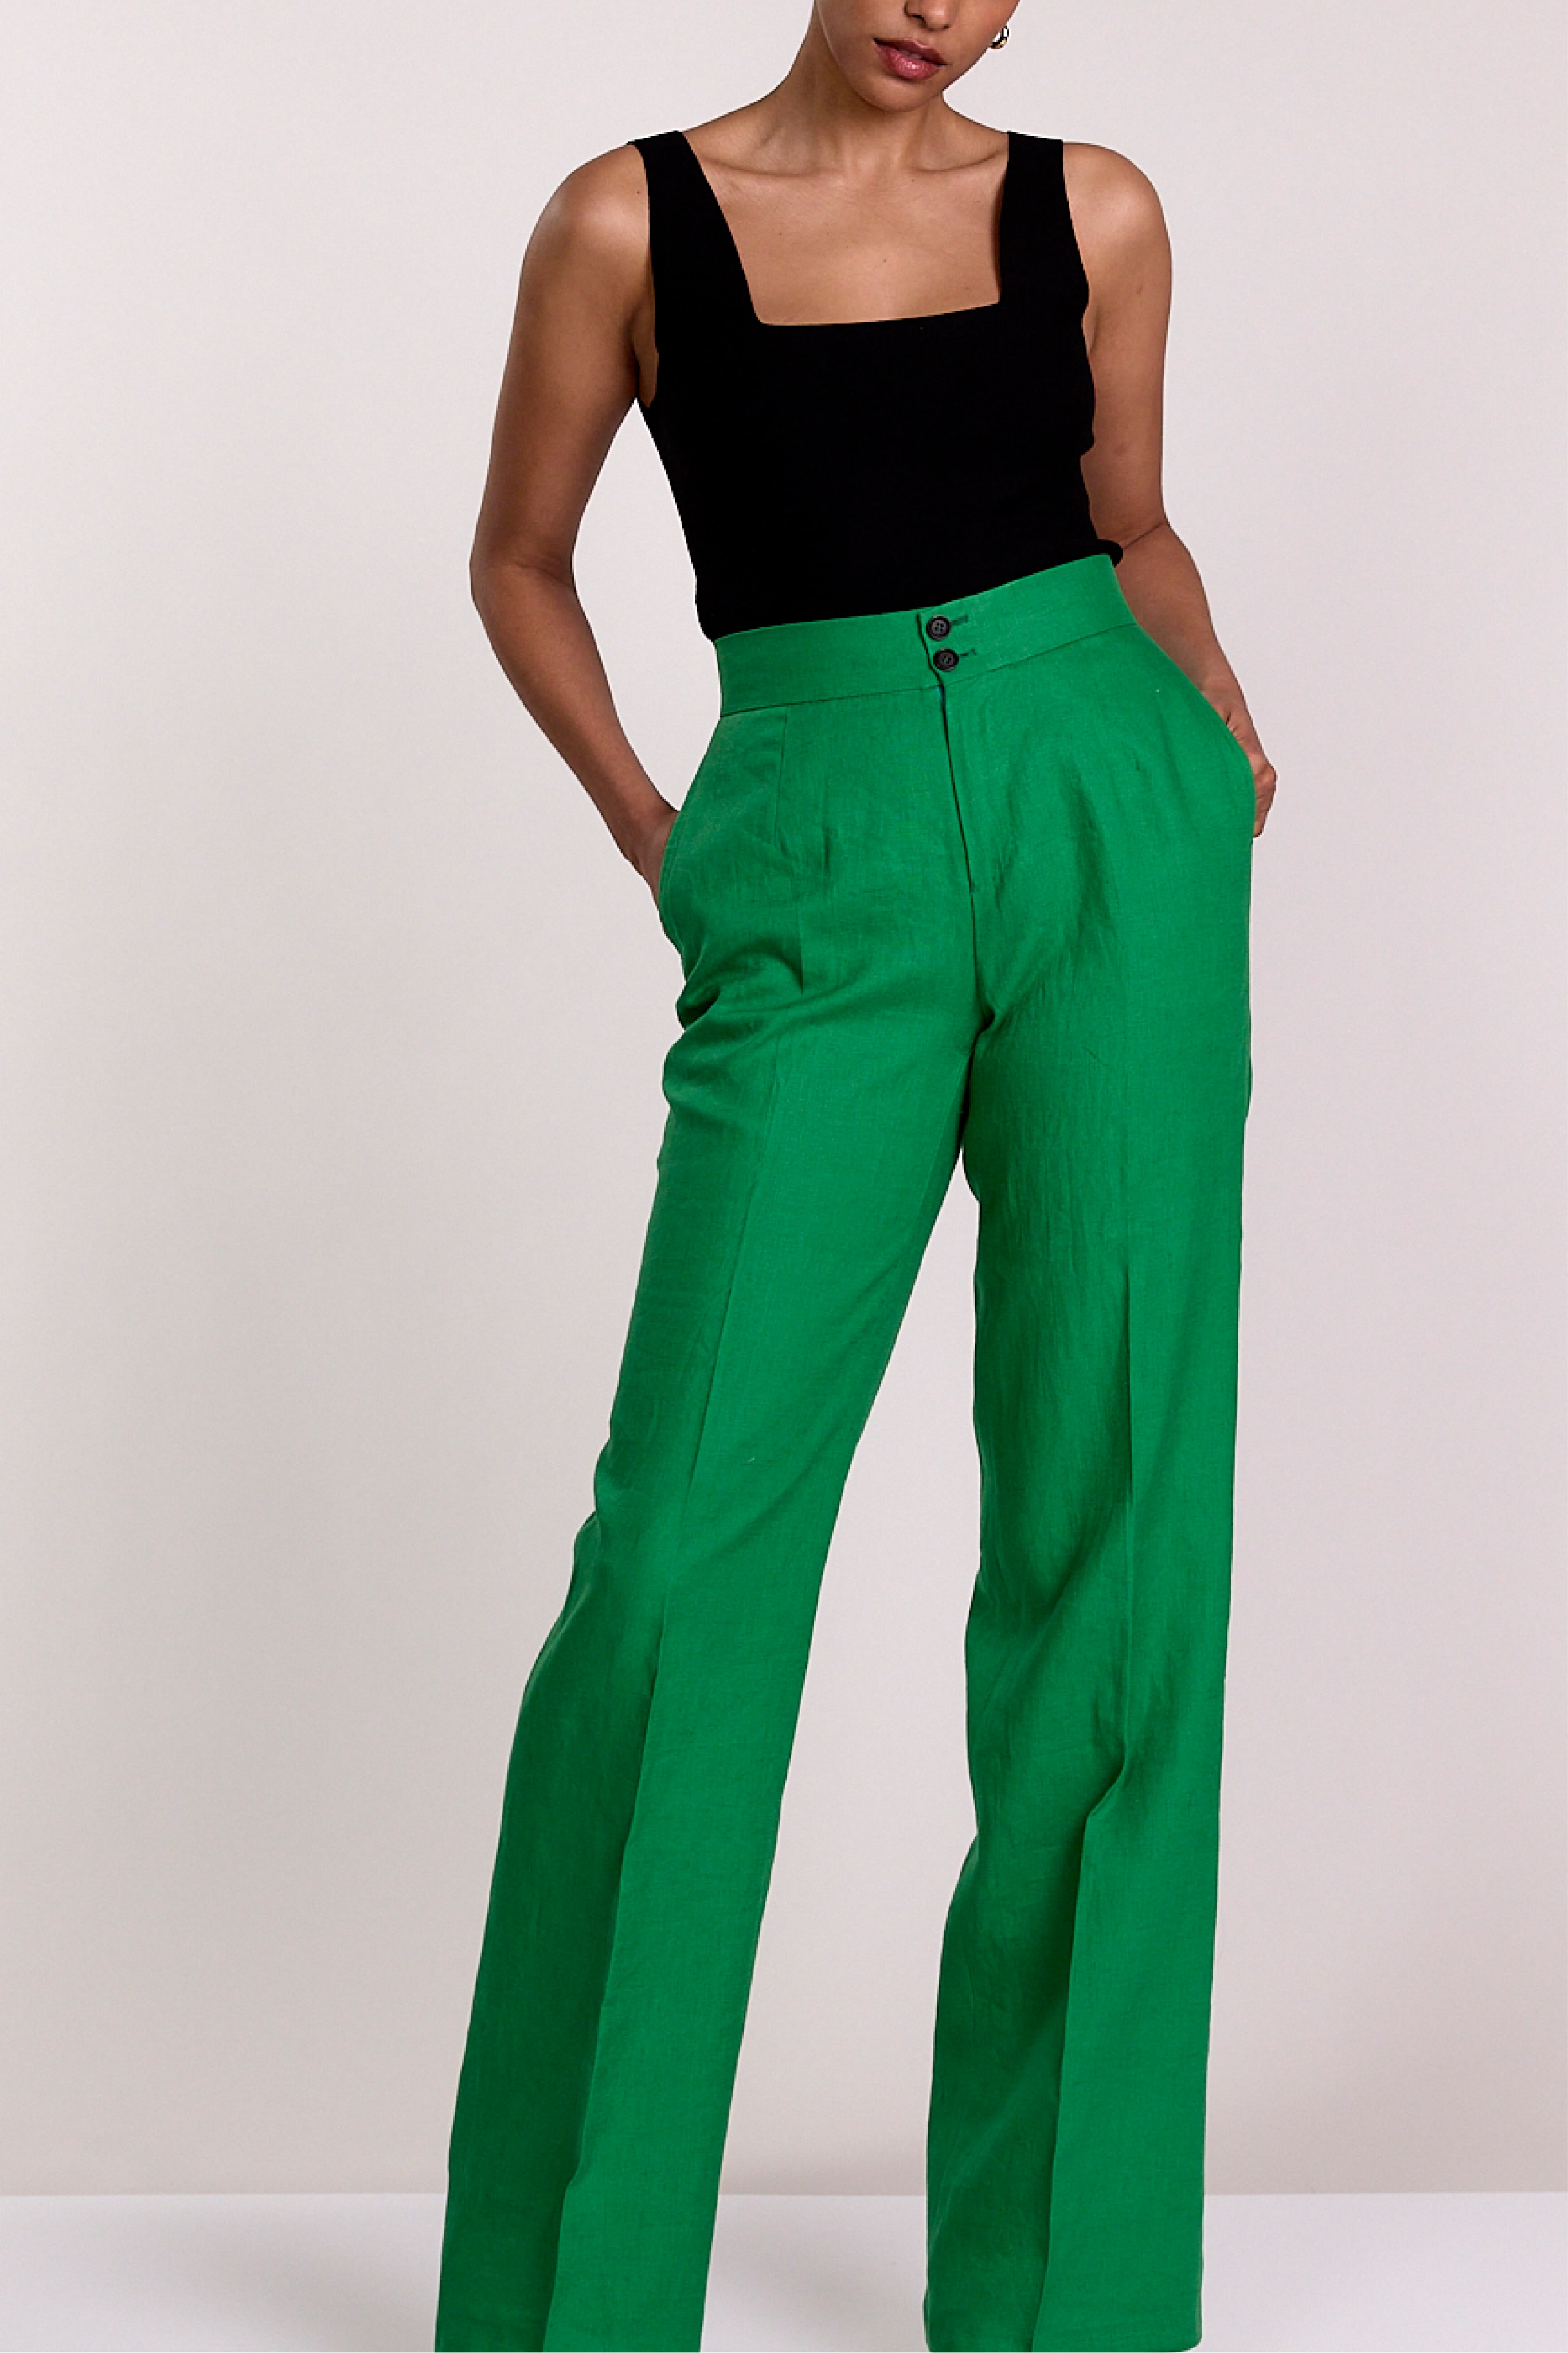 What To Wear With Green Pants For Women 2023 70 Stylish Green Pants  Outfit Ideas To Copy  Girl Shares Tips